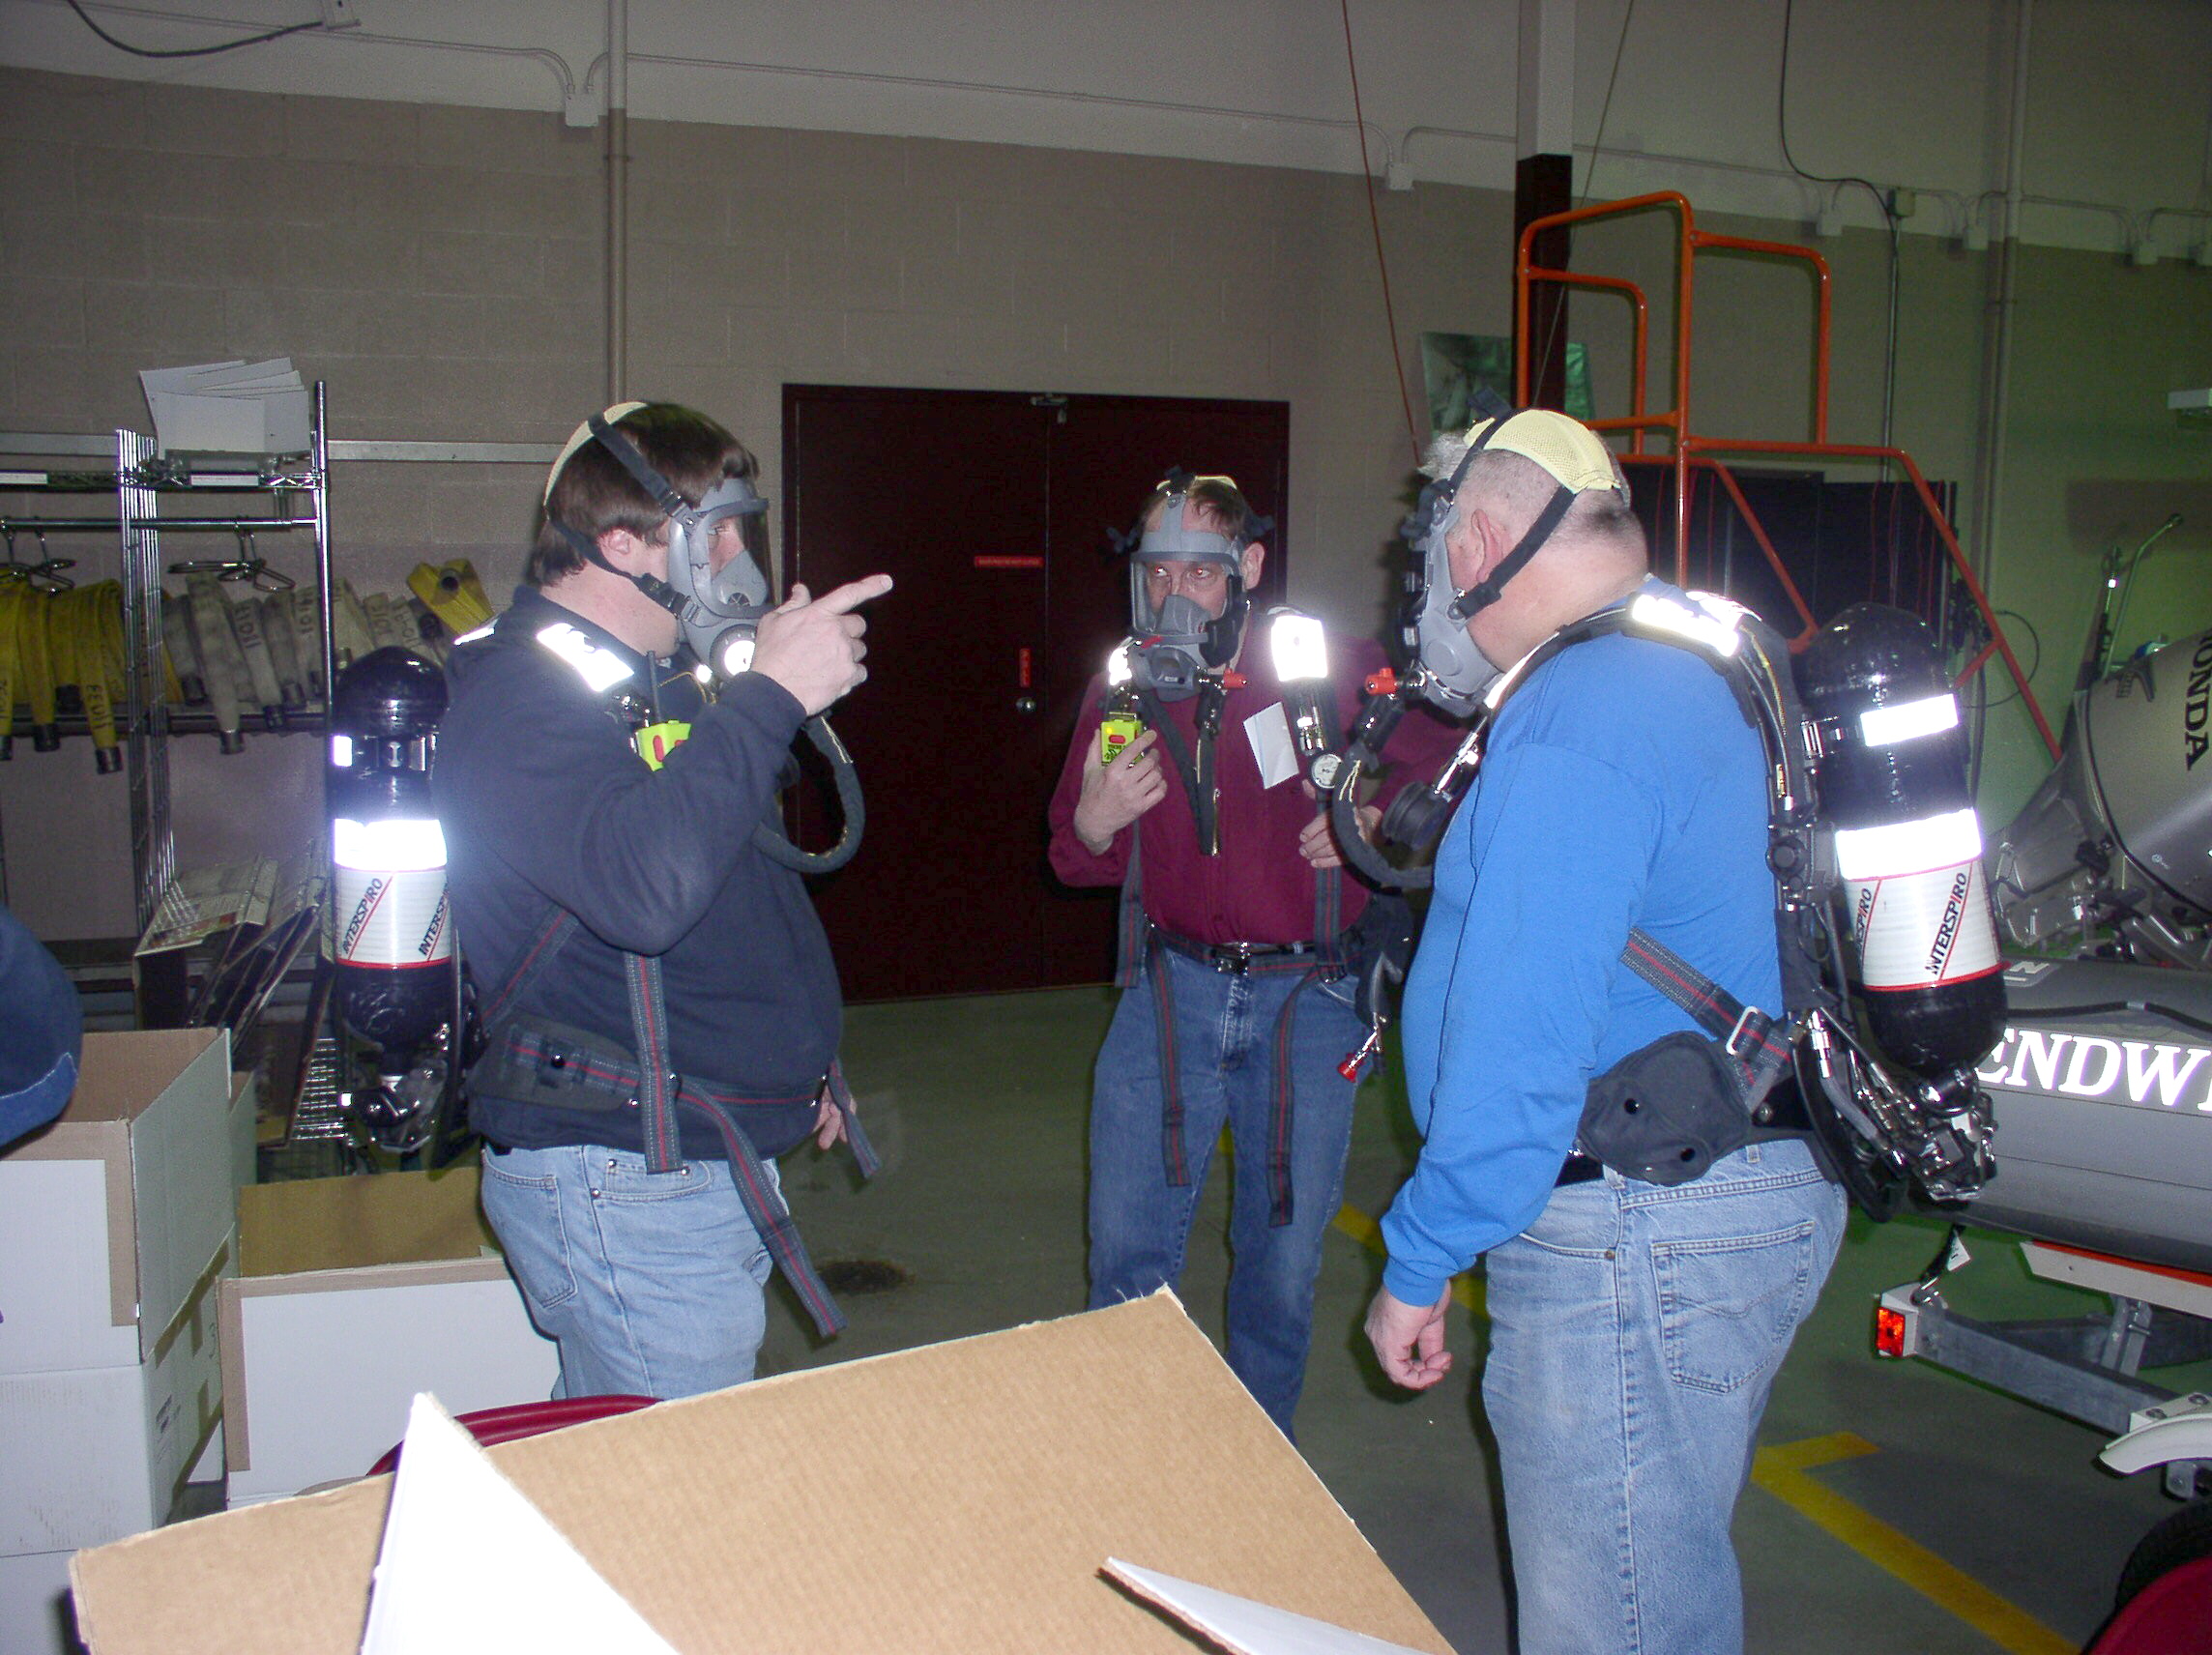 01-31-05  Other - New SCBA